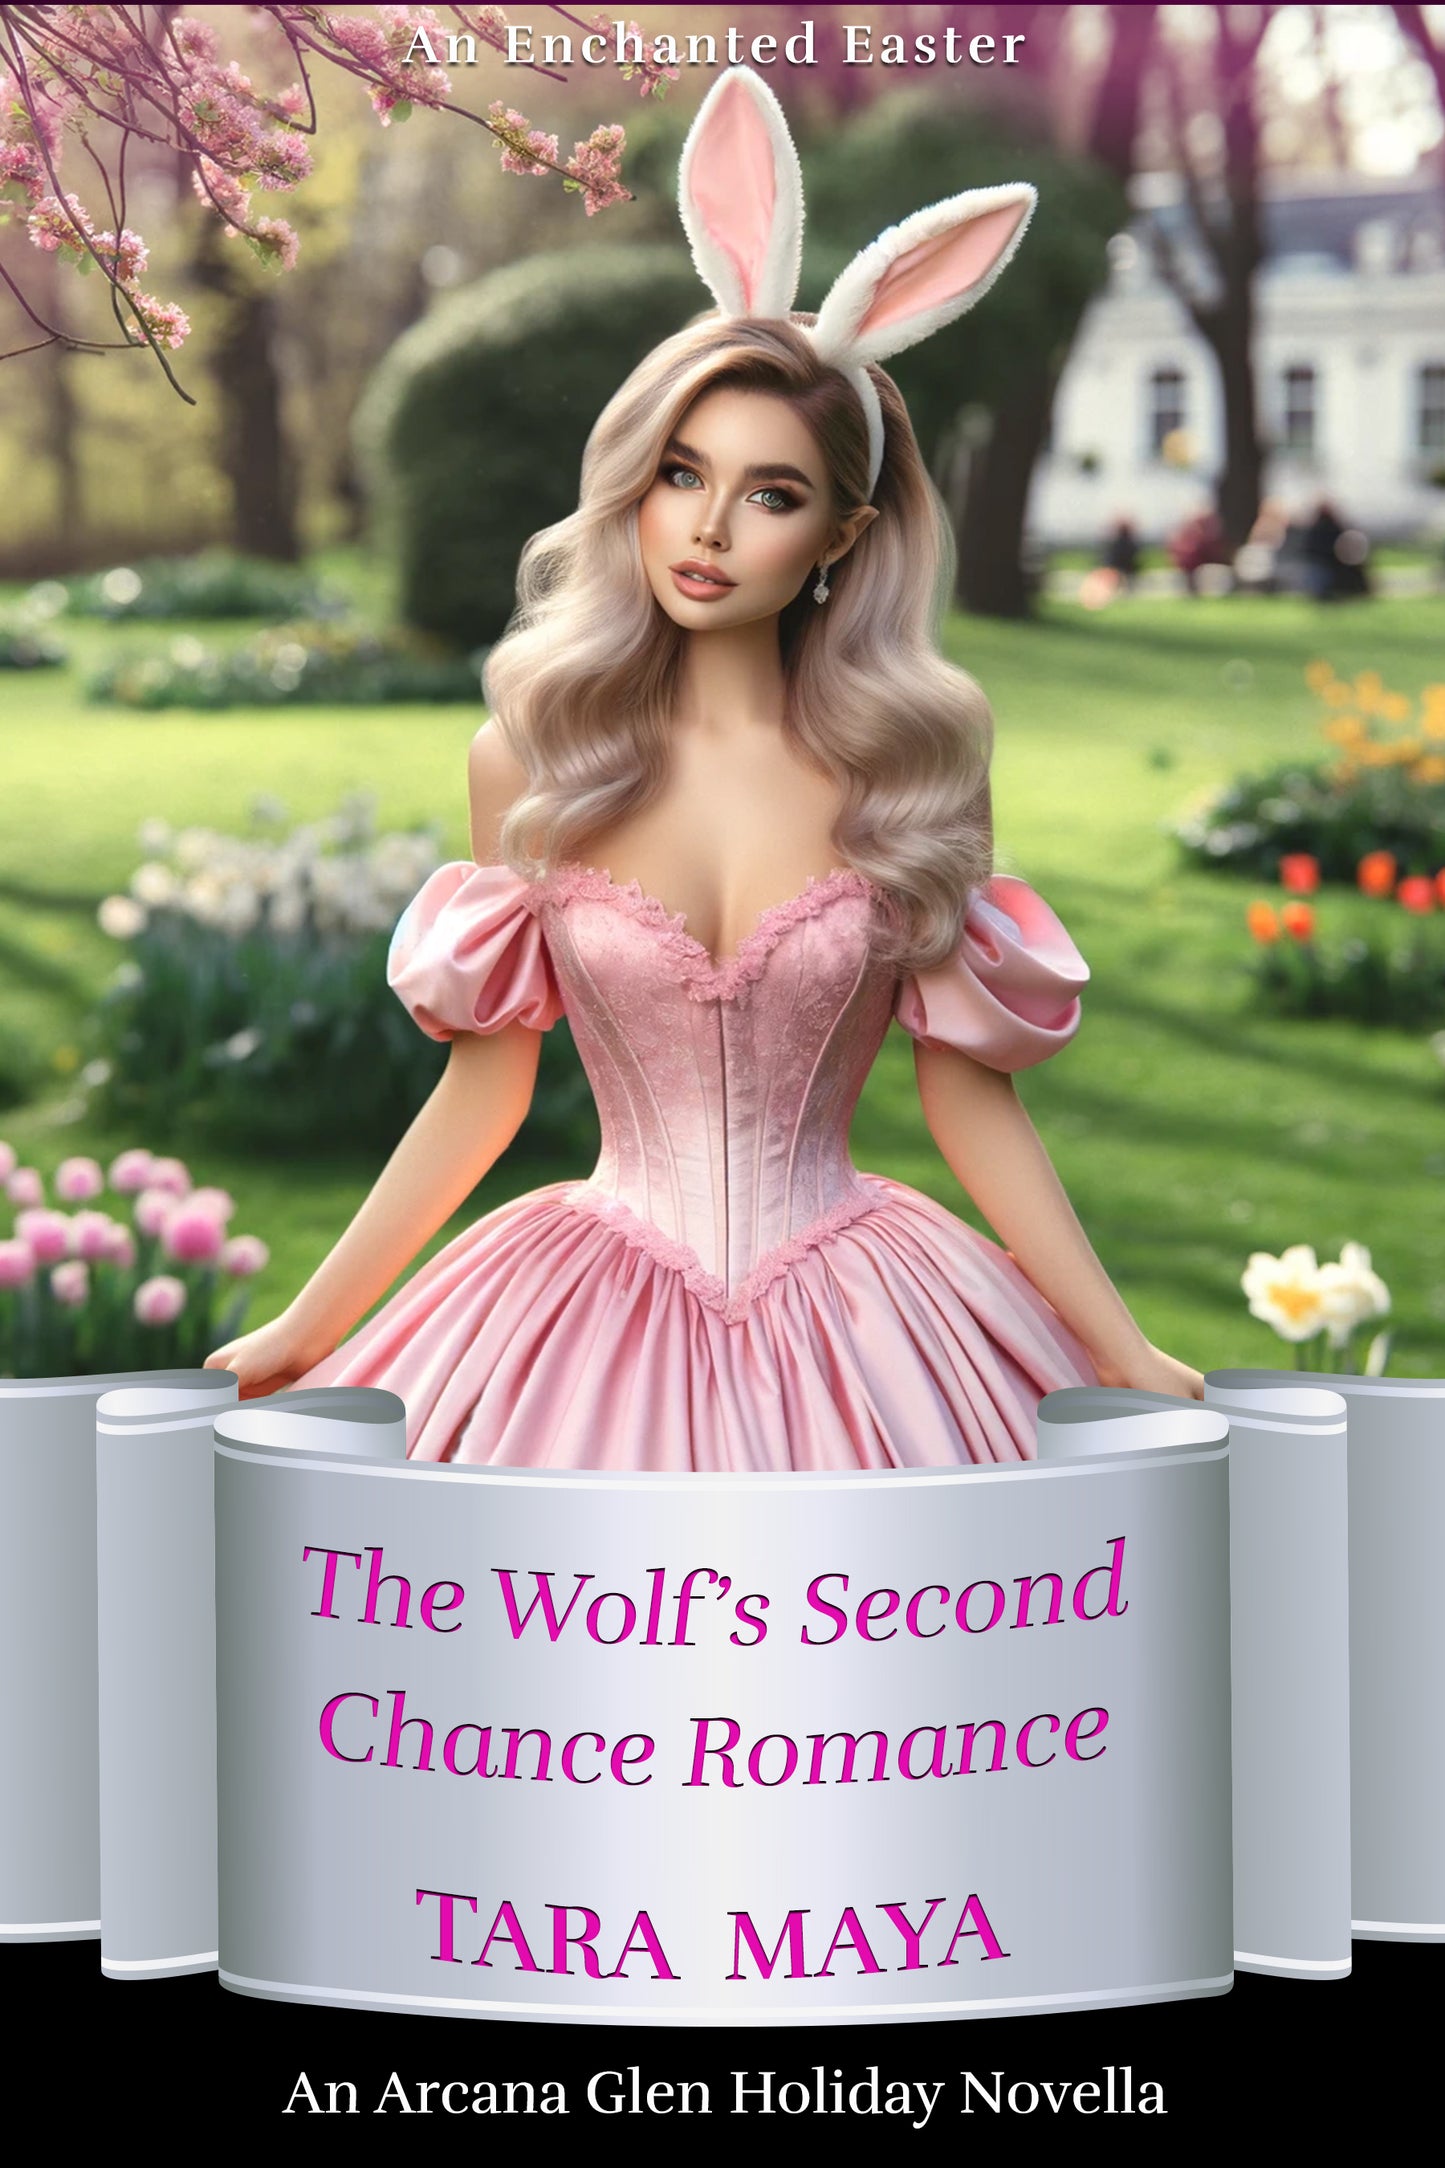 Arcana Glen Holiday Novella  4 - An Enchanted Easter: The Wolf’s Second Chance Romance